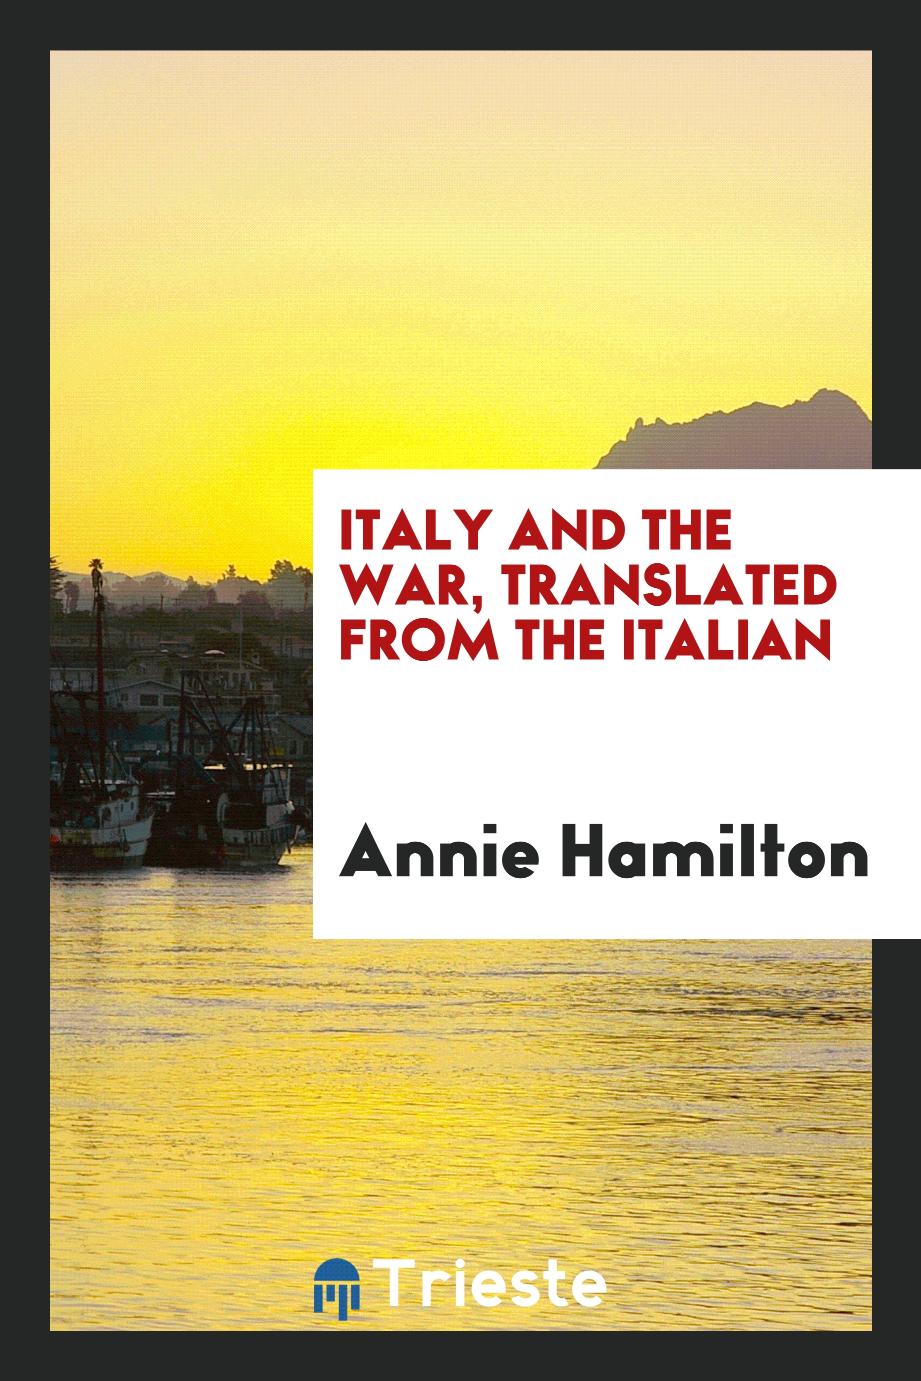 Italy and the war, translated from the Italian